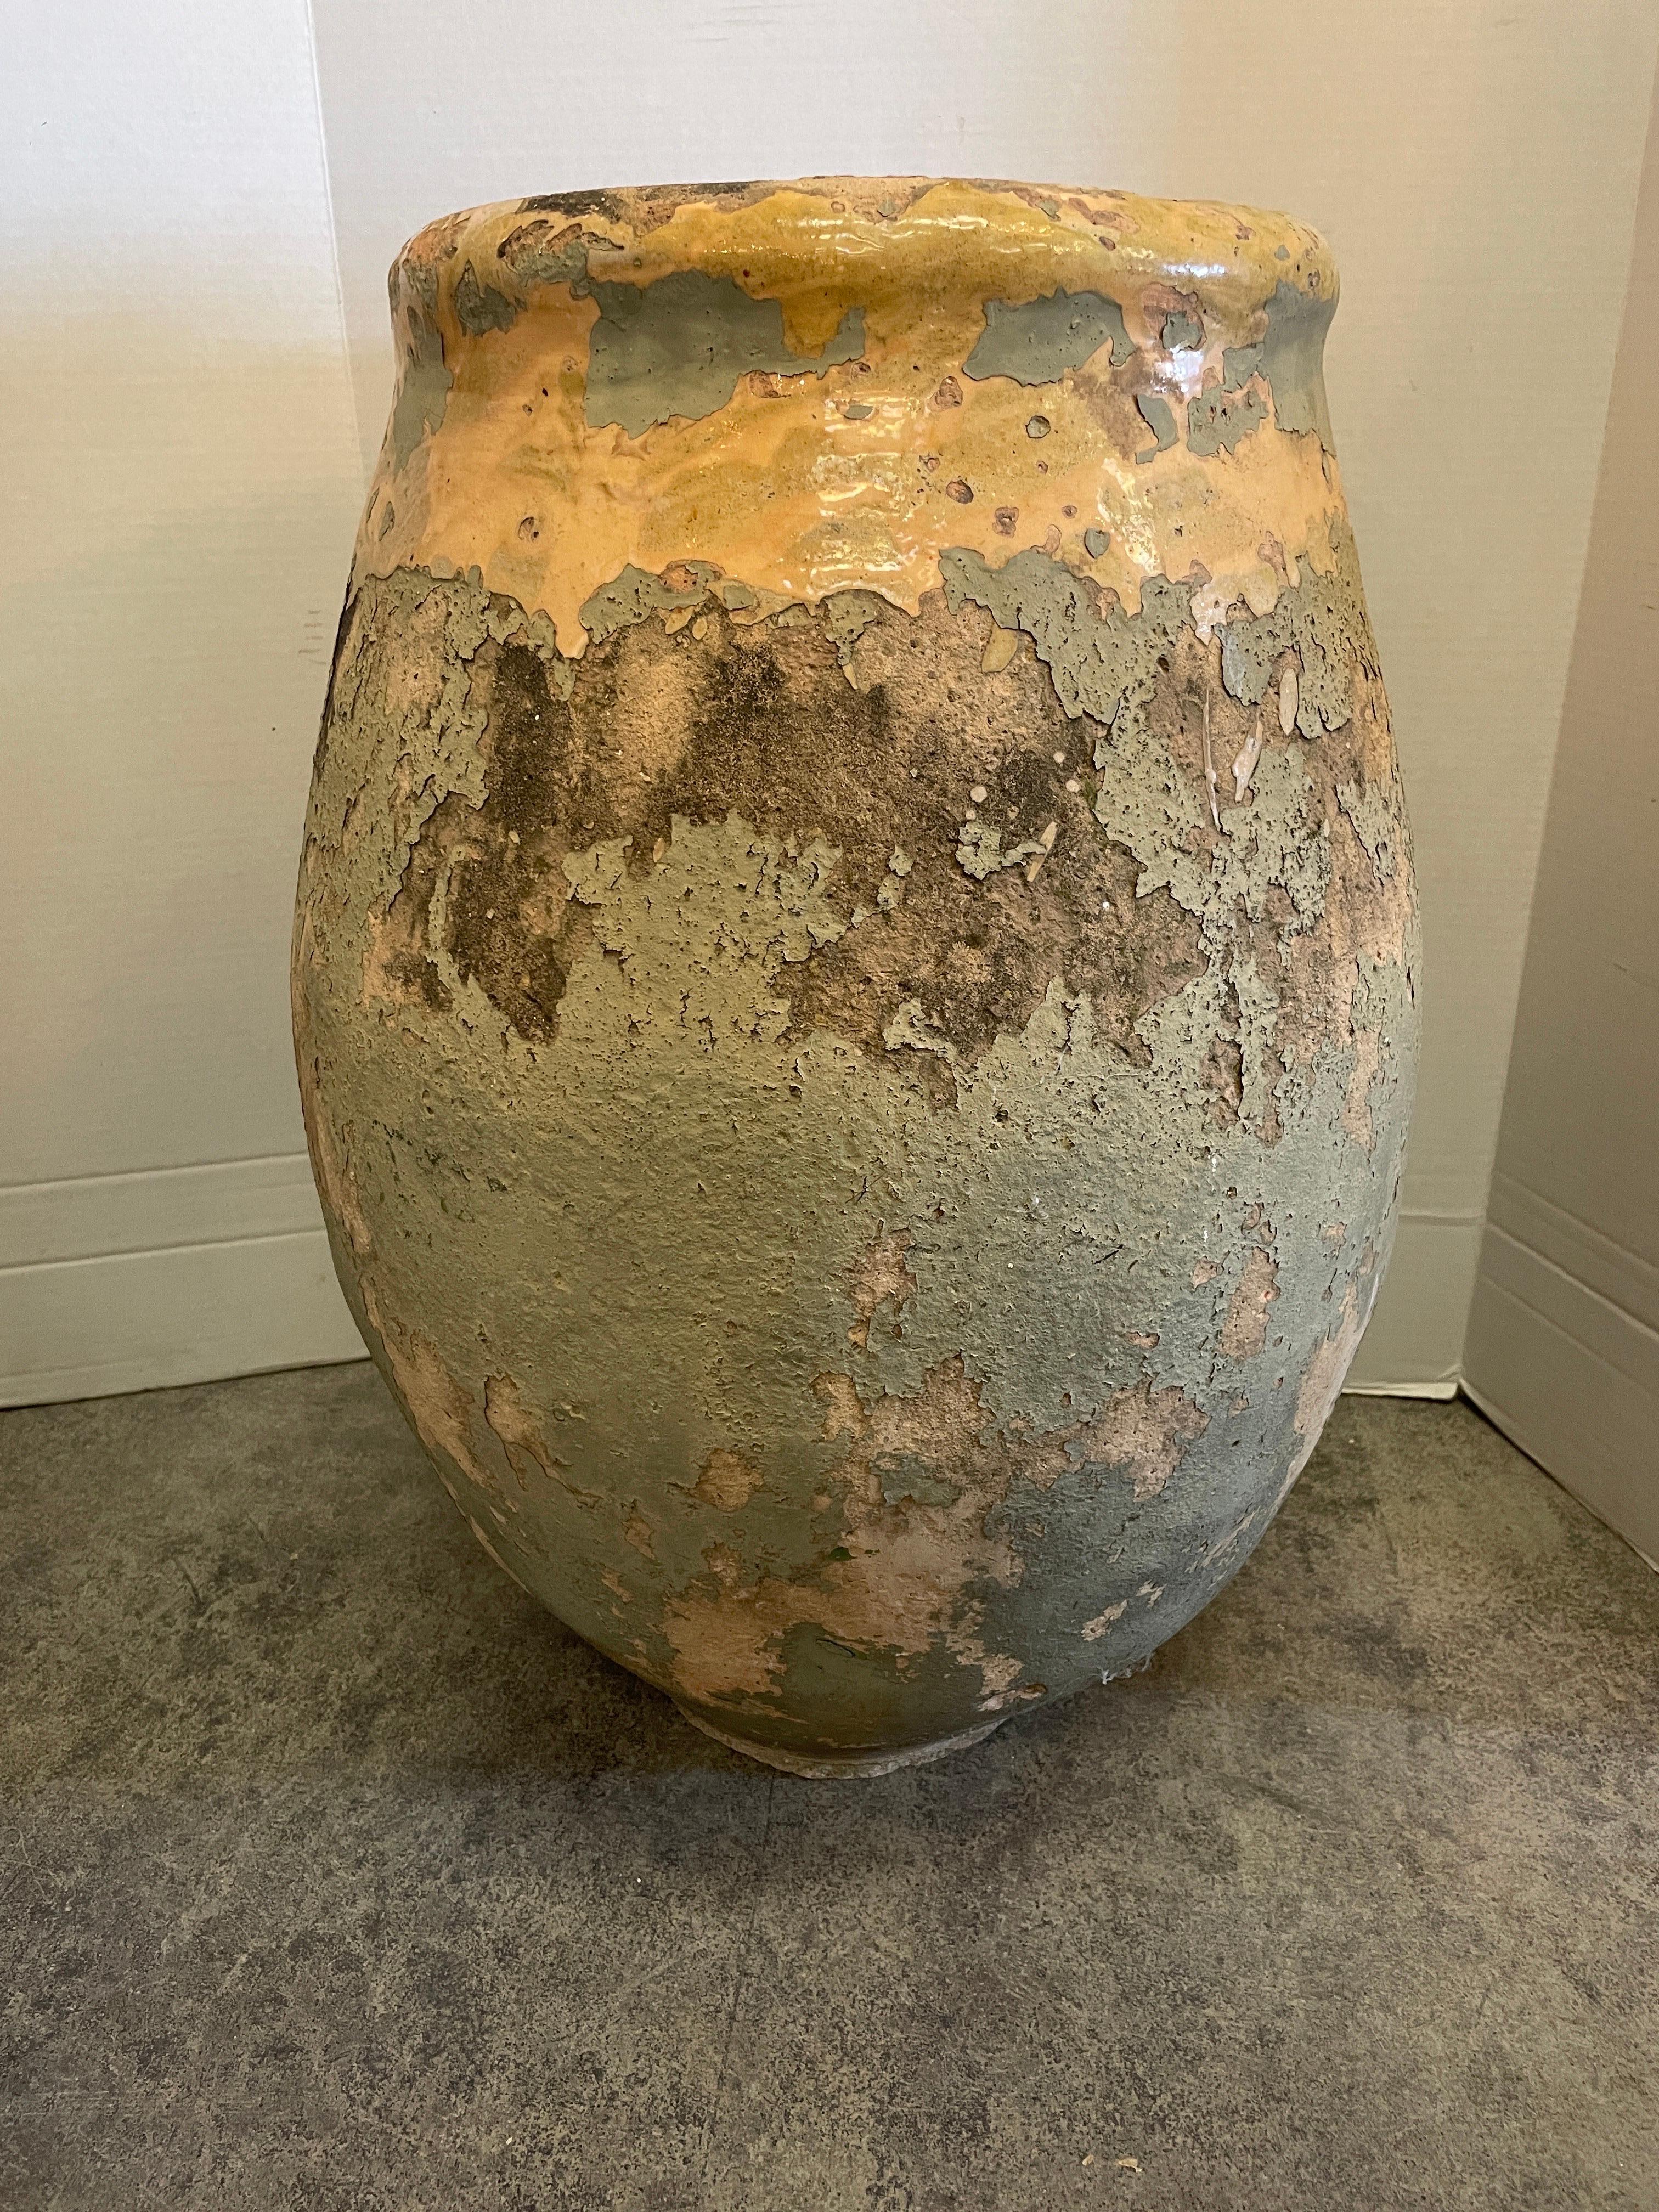 The color is amazing on this early hand thrown French 18th century terra cotta jar with light yellow glazing on top.
The lemon yellow is very pleasing as is the pale french green paint over it that's distressed and peeling off.  Originally Biots